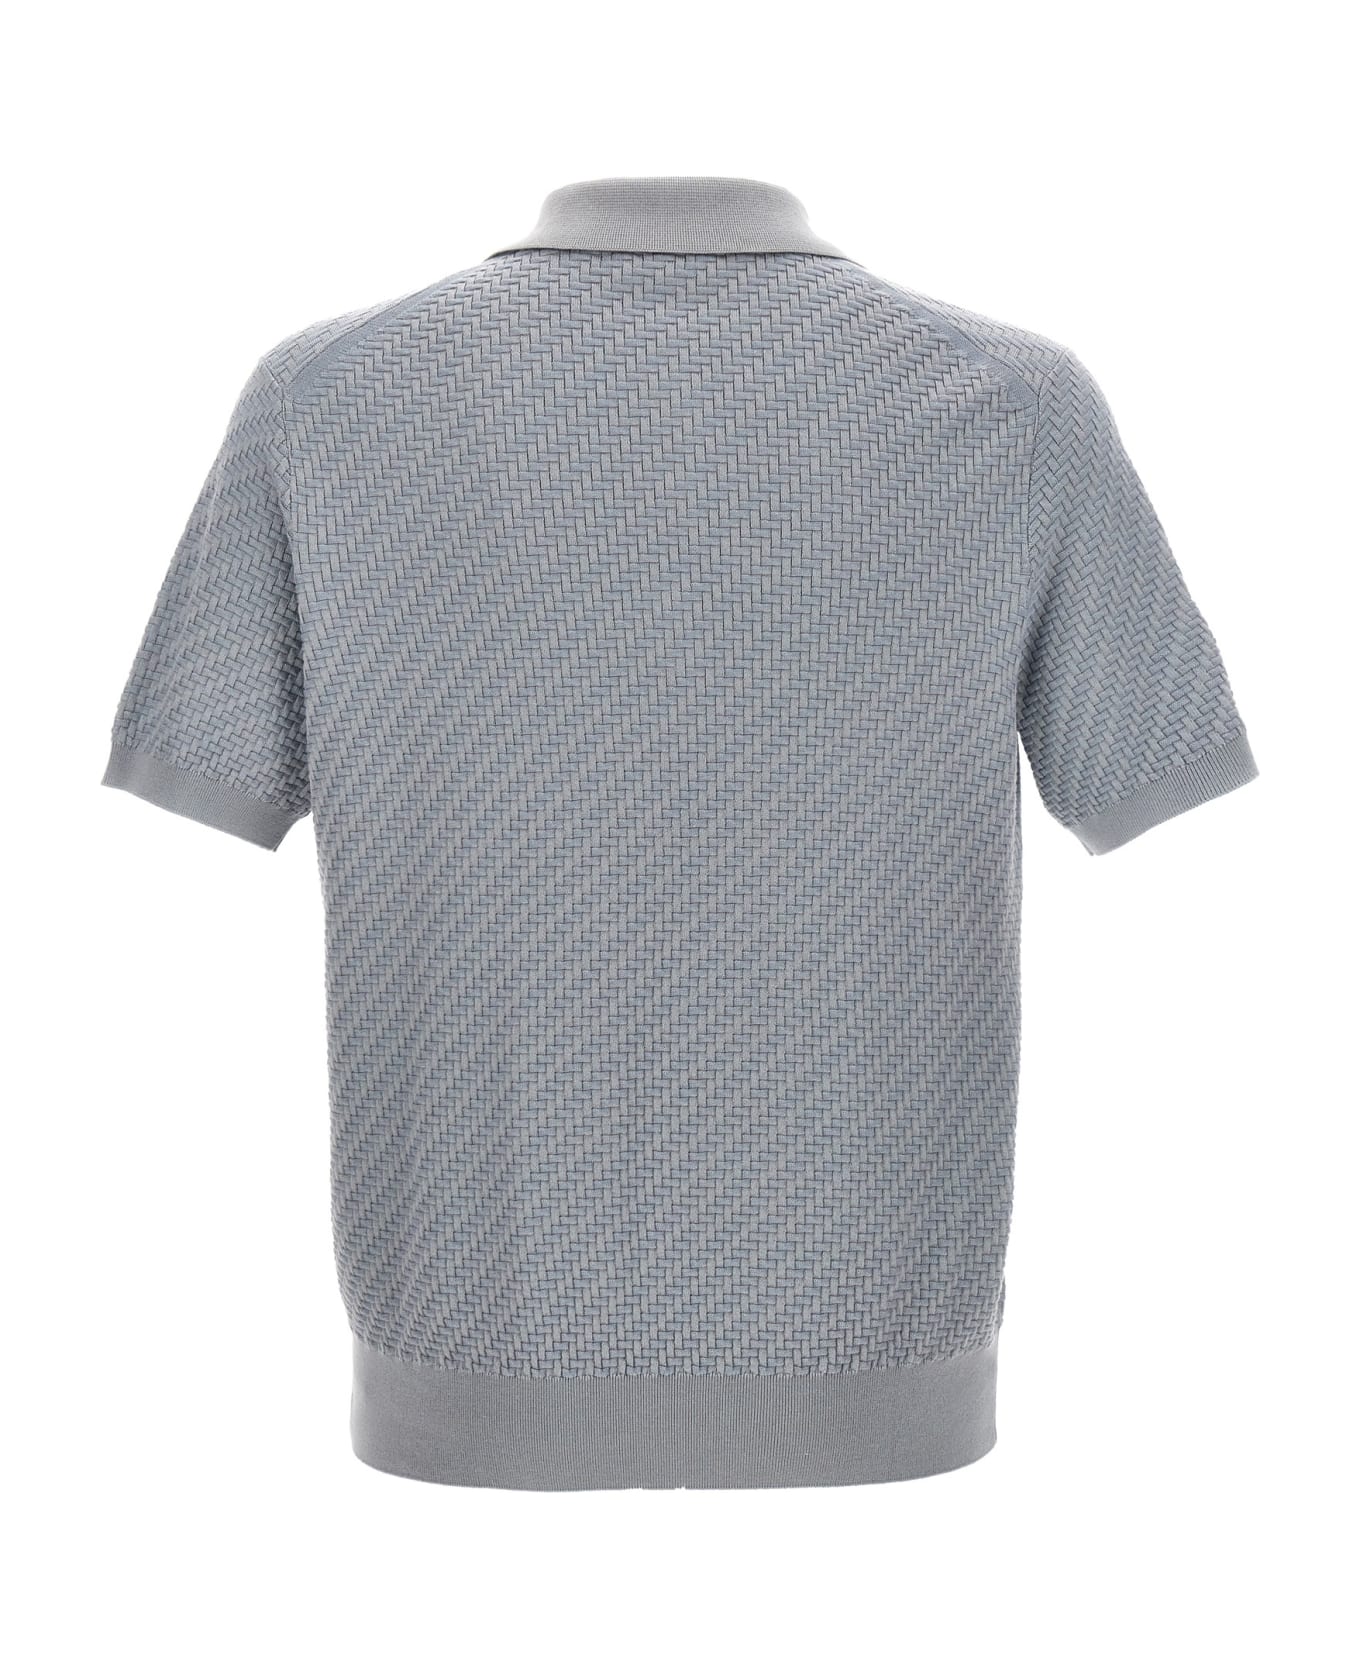 Brioni Woven Knit Polo Shirt - Gnawed Blue